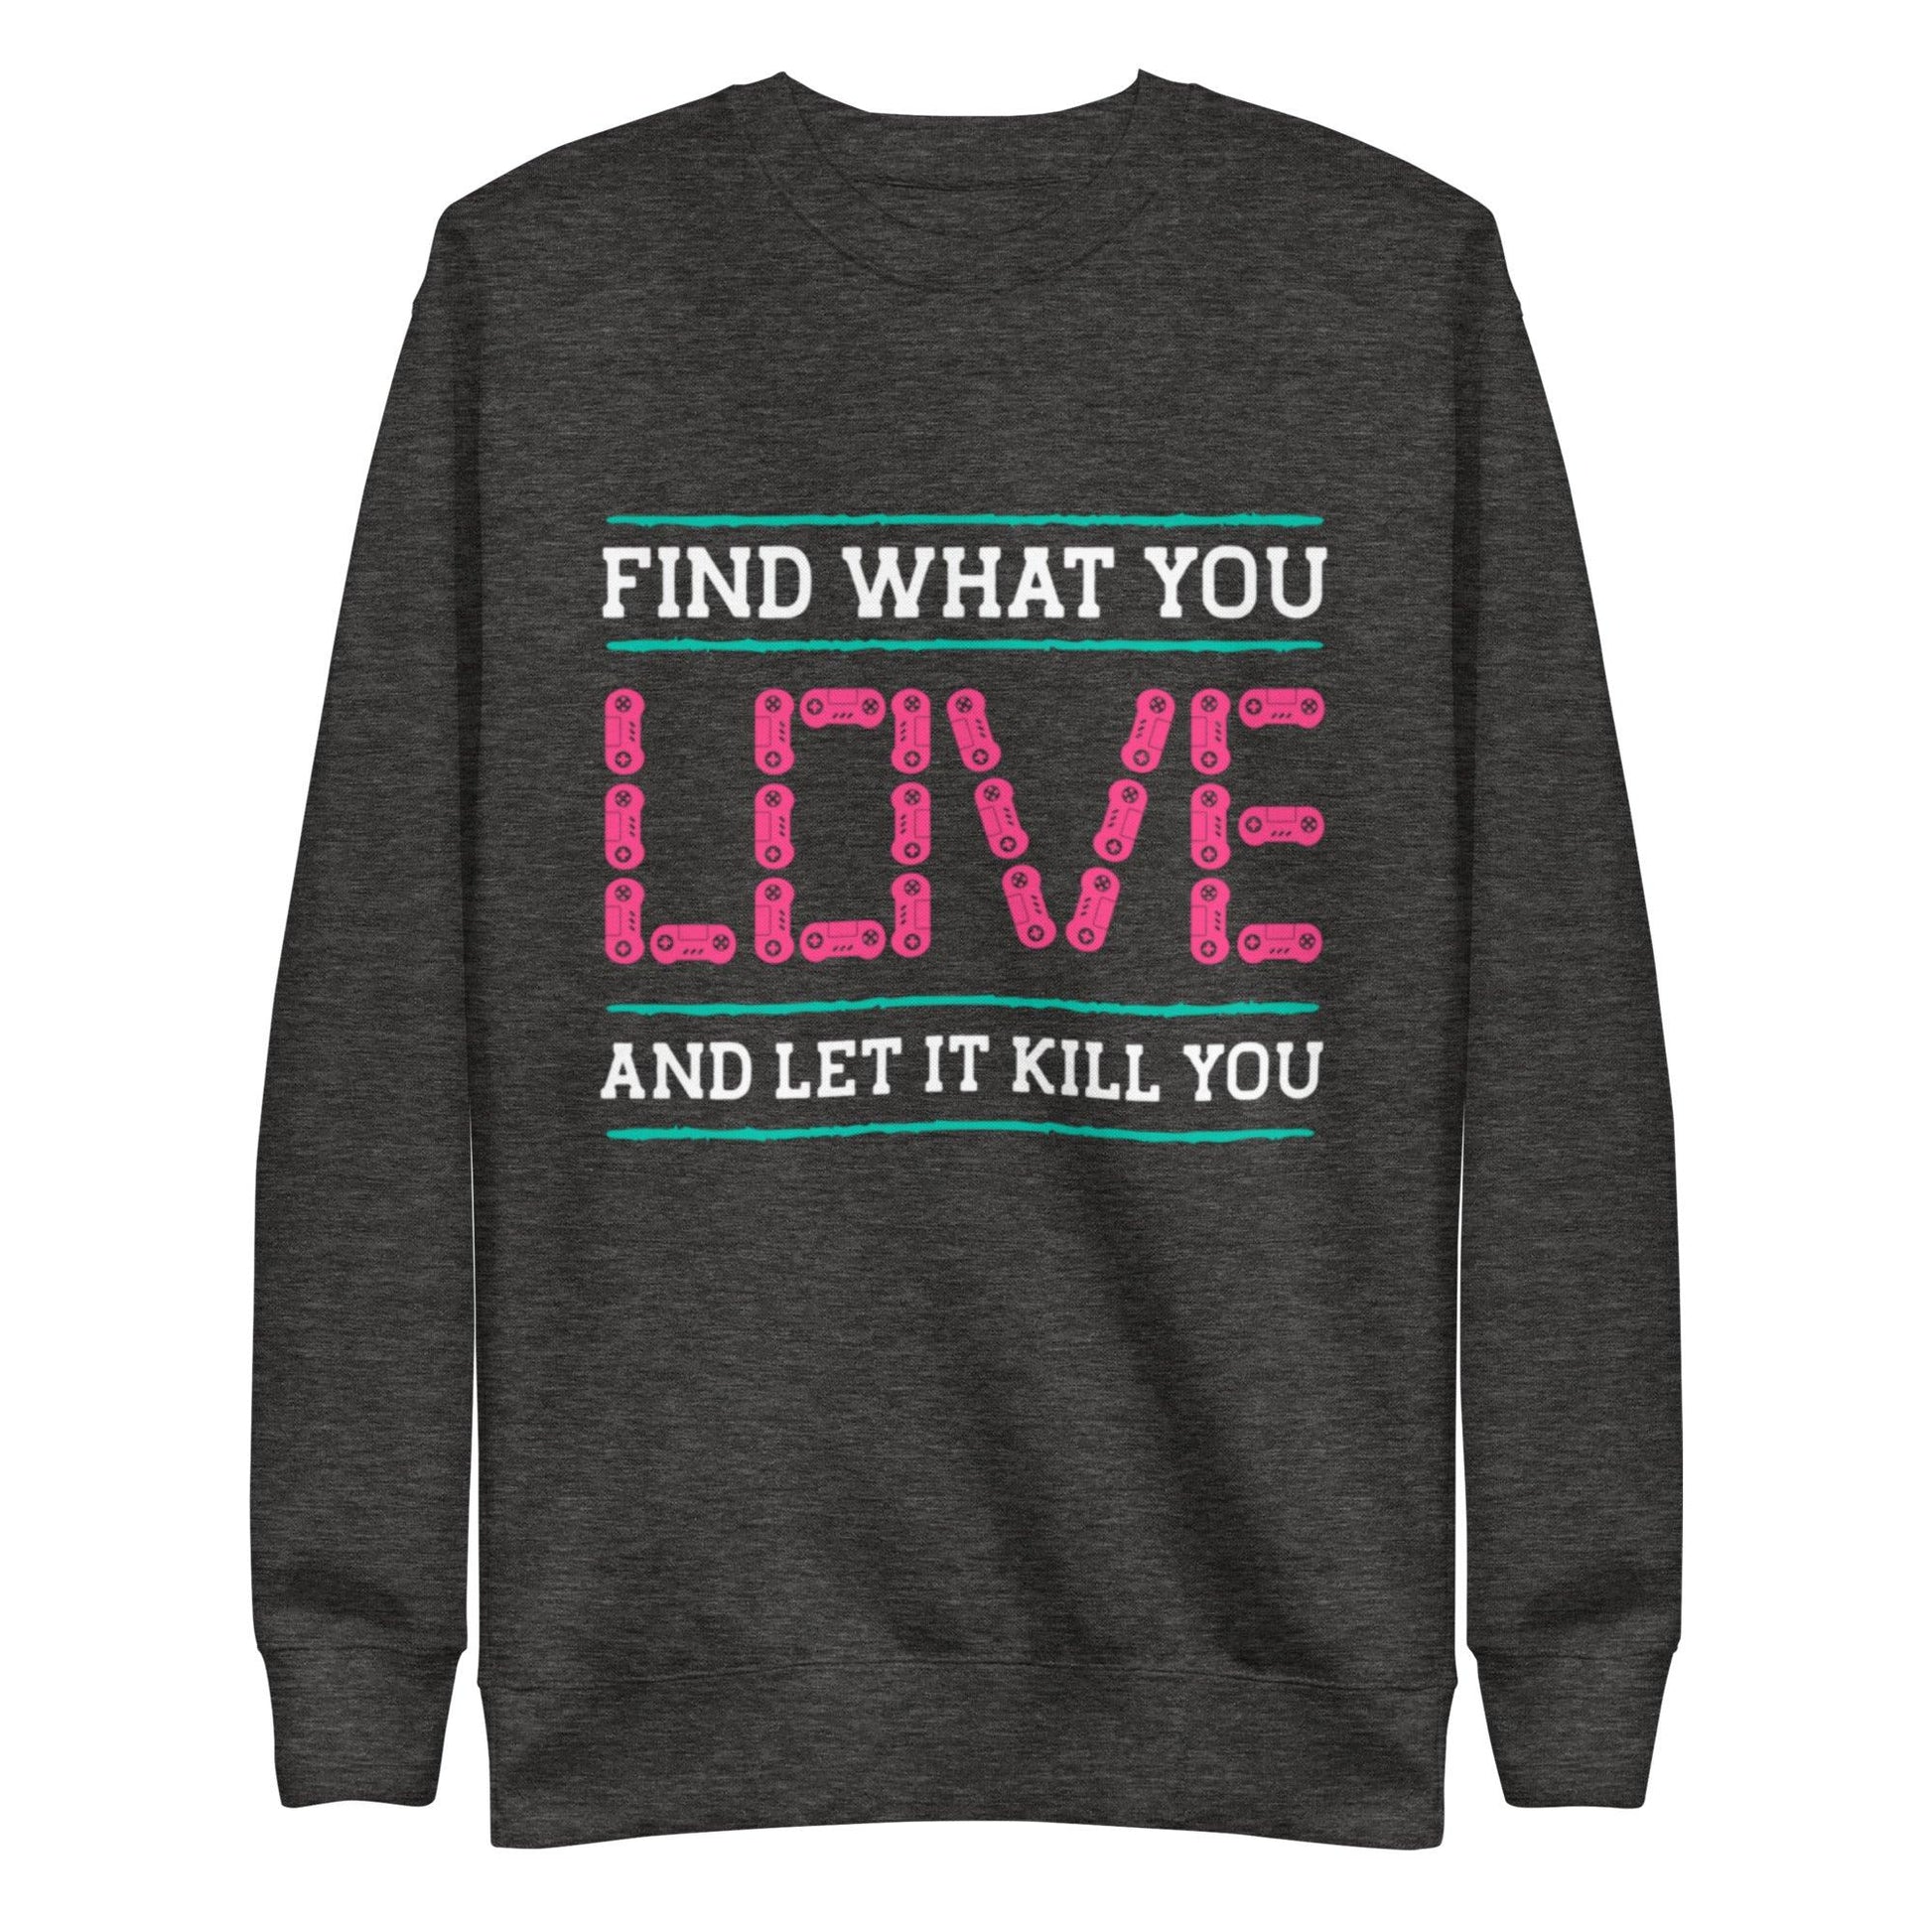 Unisex Premium Sweatshirt Find What You Love And Let It Kill You - Canvazon